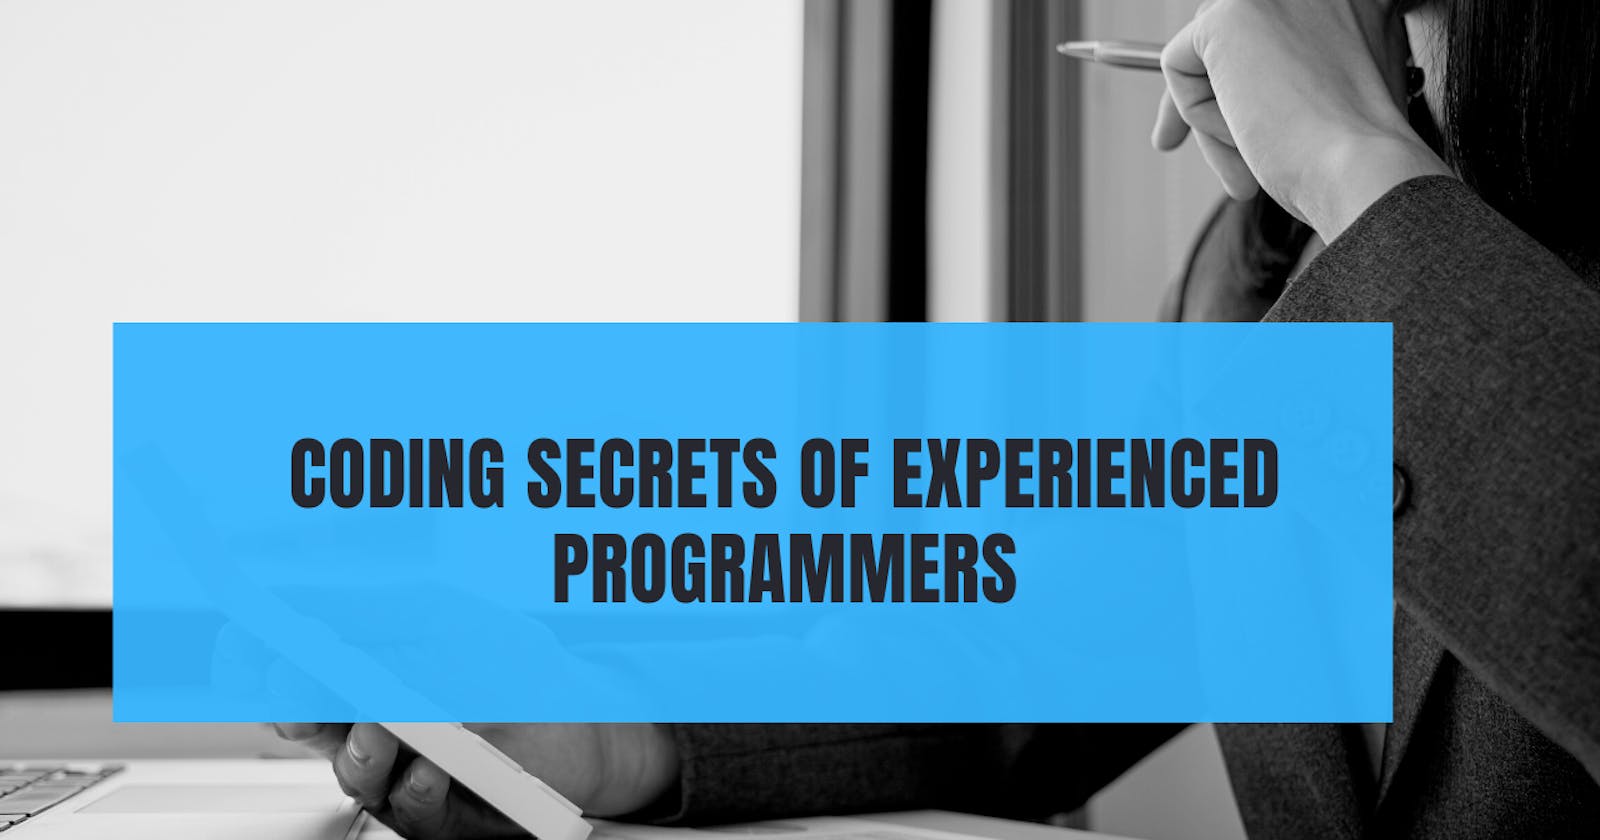 Coding secrets of experienced programmers